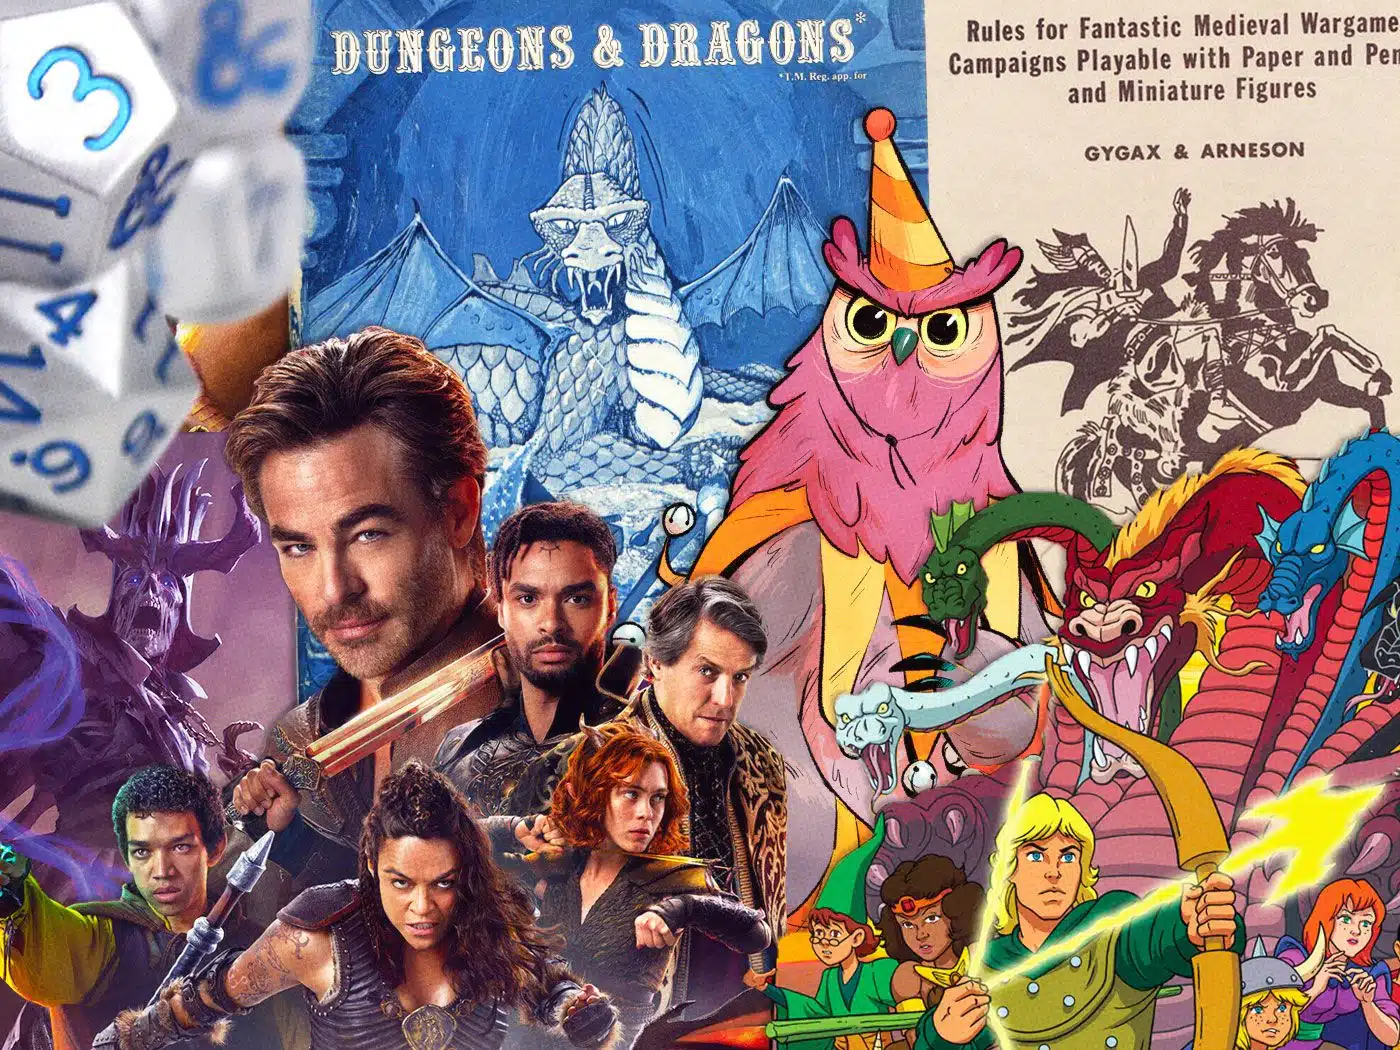 Interesting Facts You Didn't Know About Dungeons & Dragons